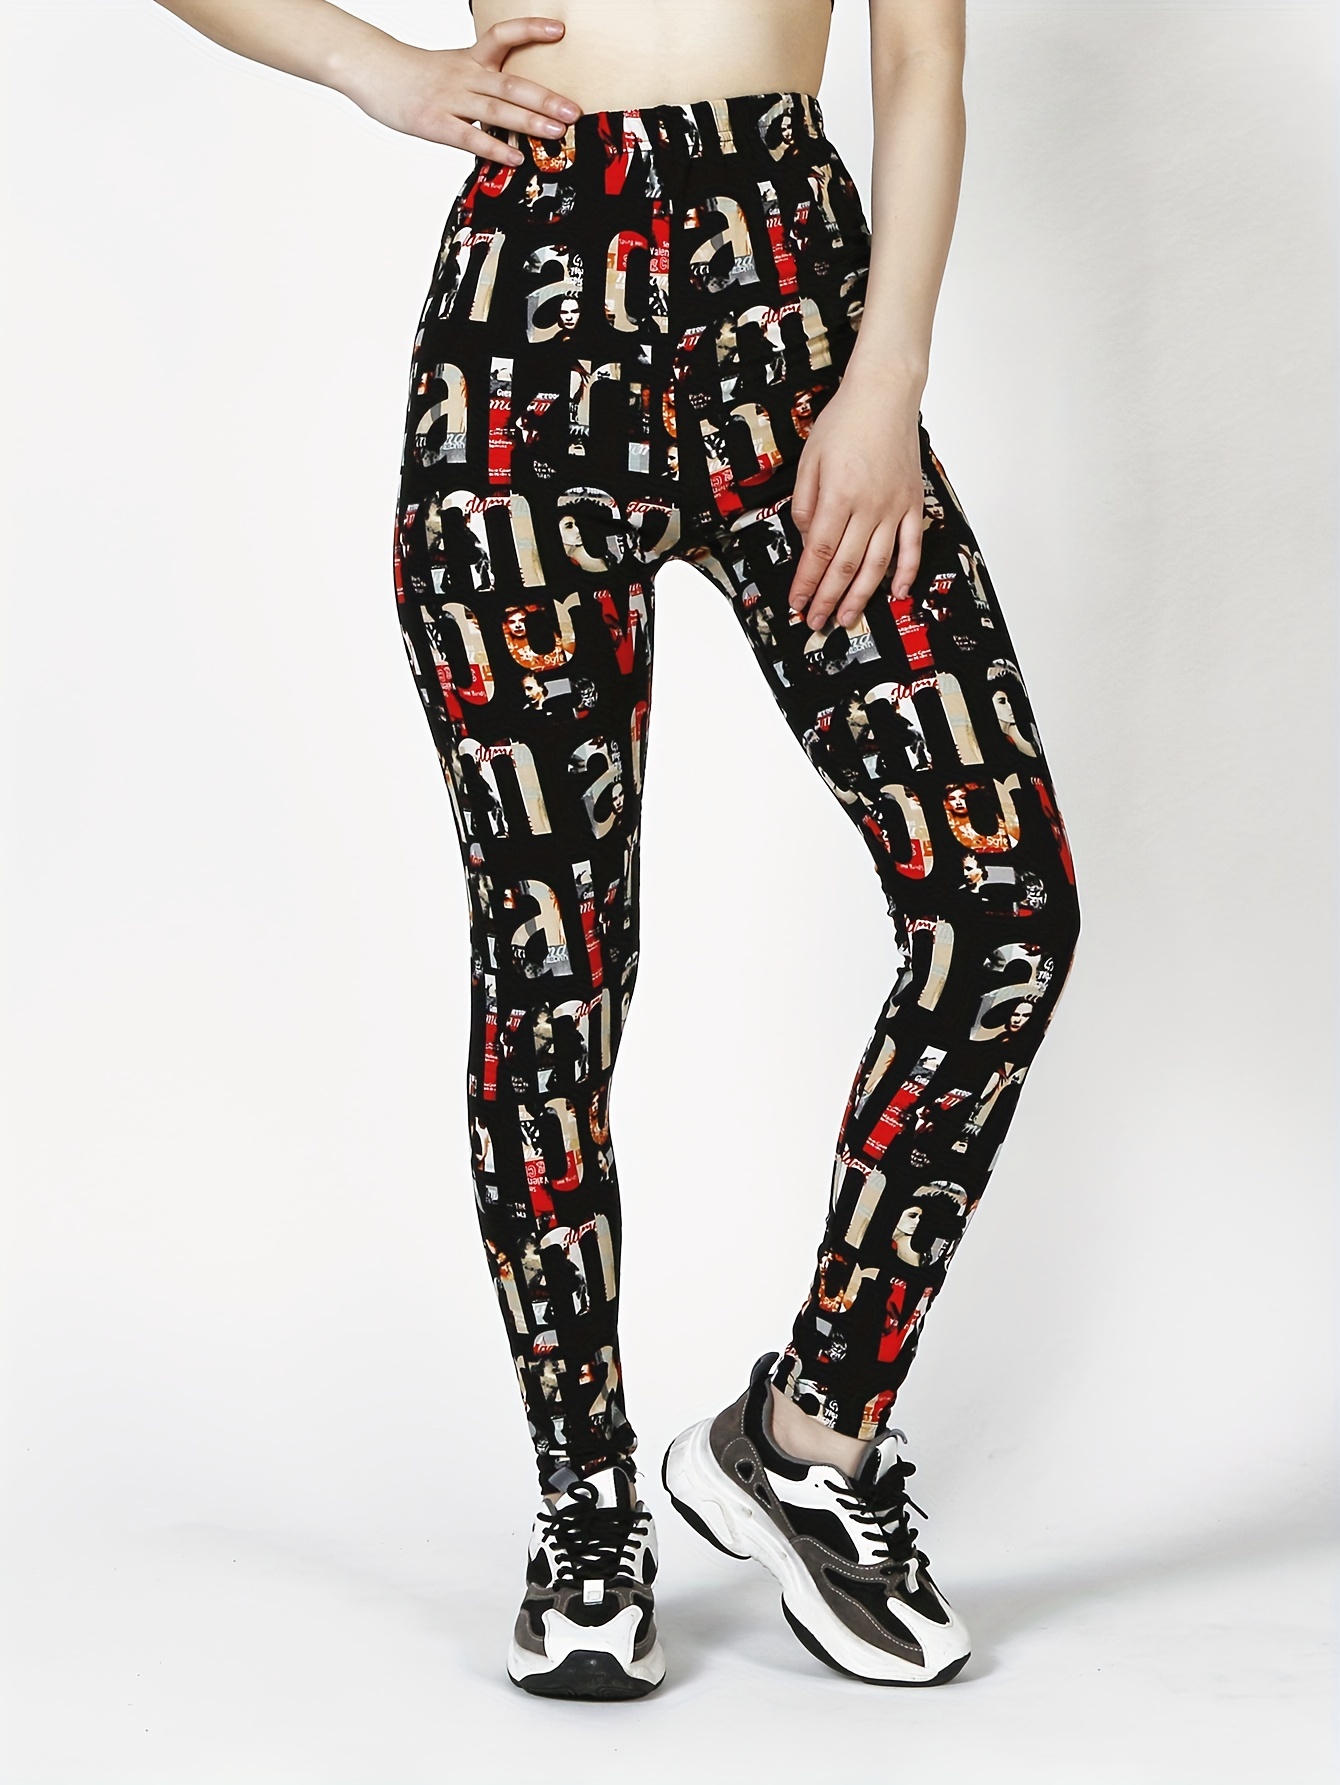 Skimpy Tights for Women Leggings Fashion Graphic Printed High